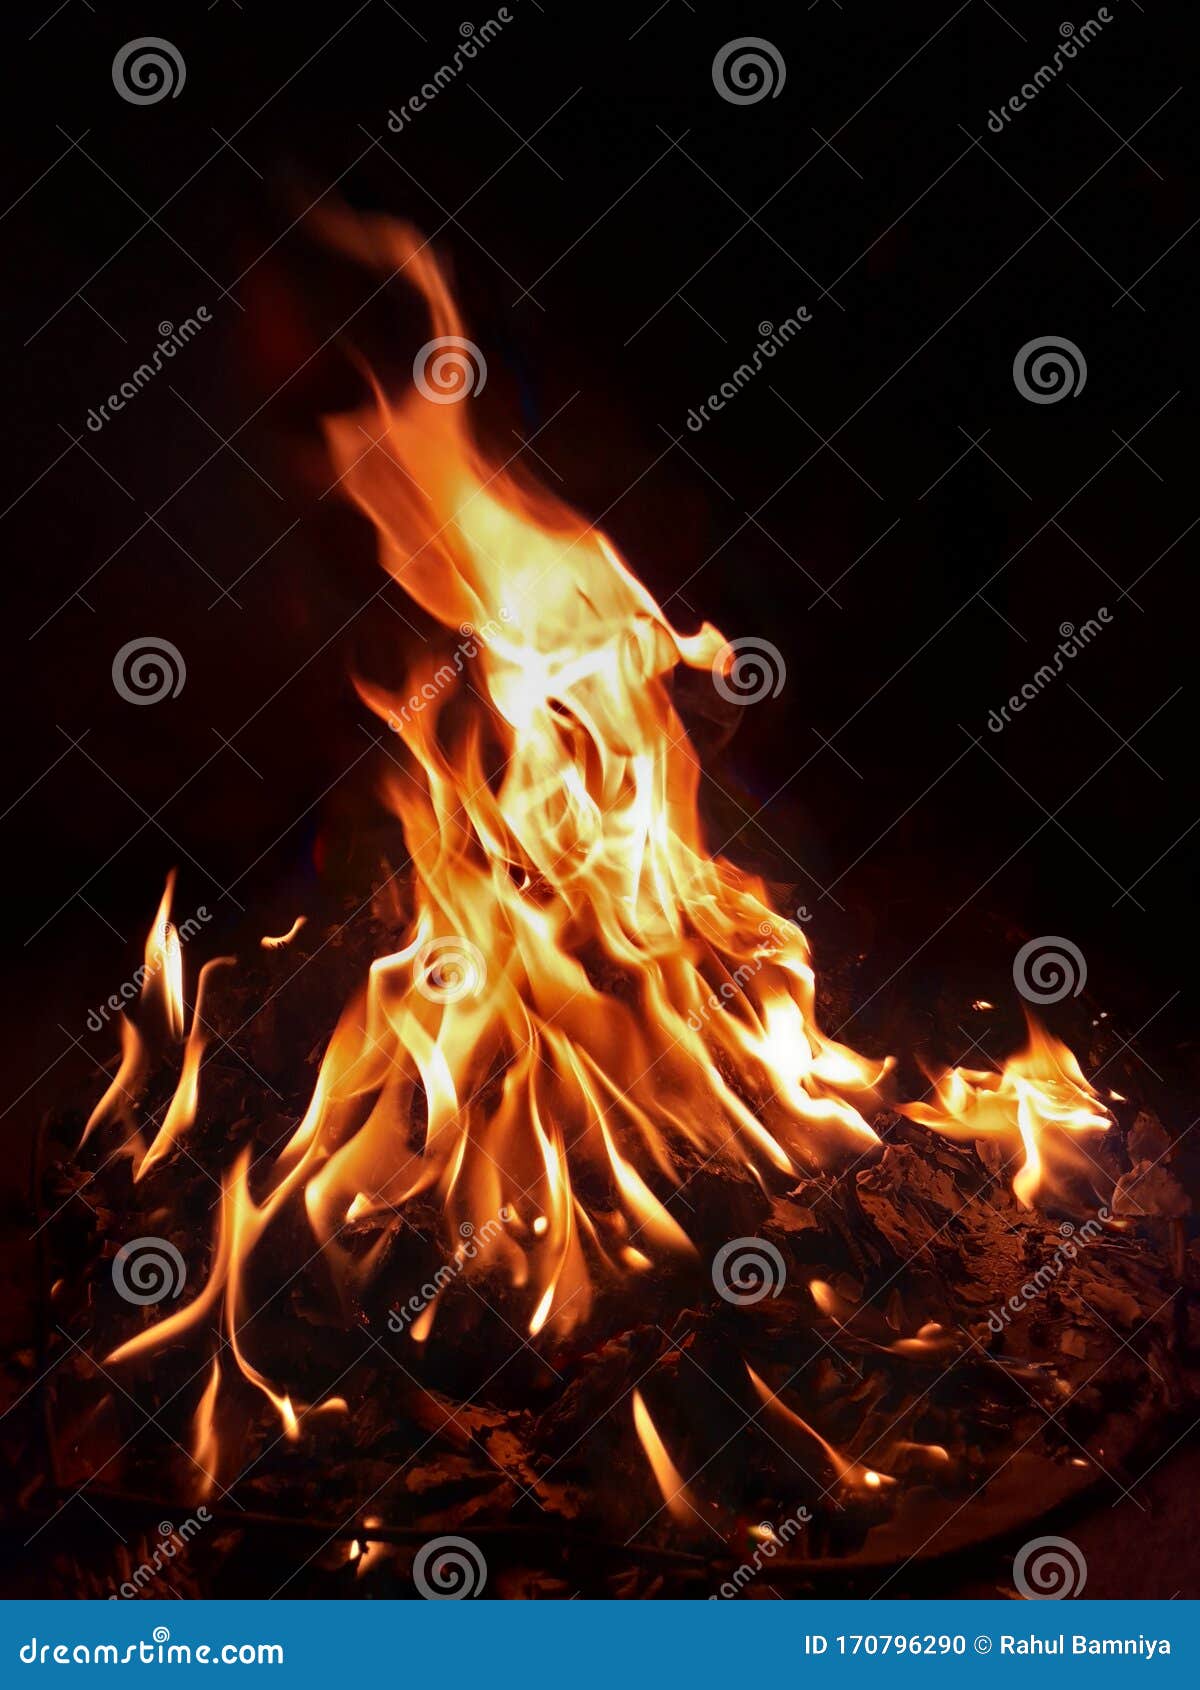 flame png